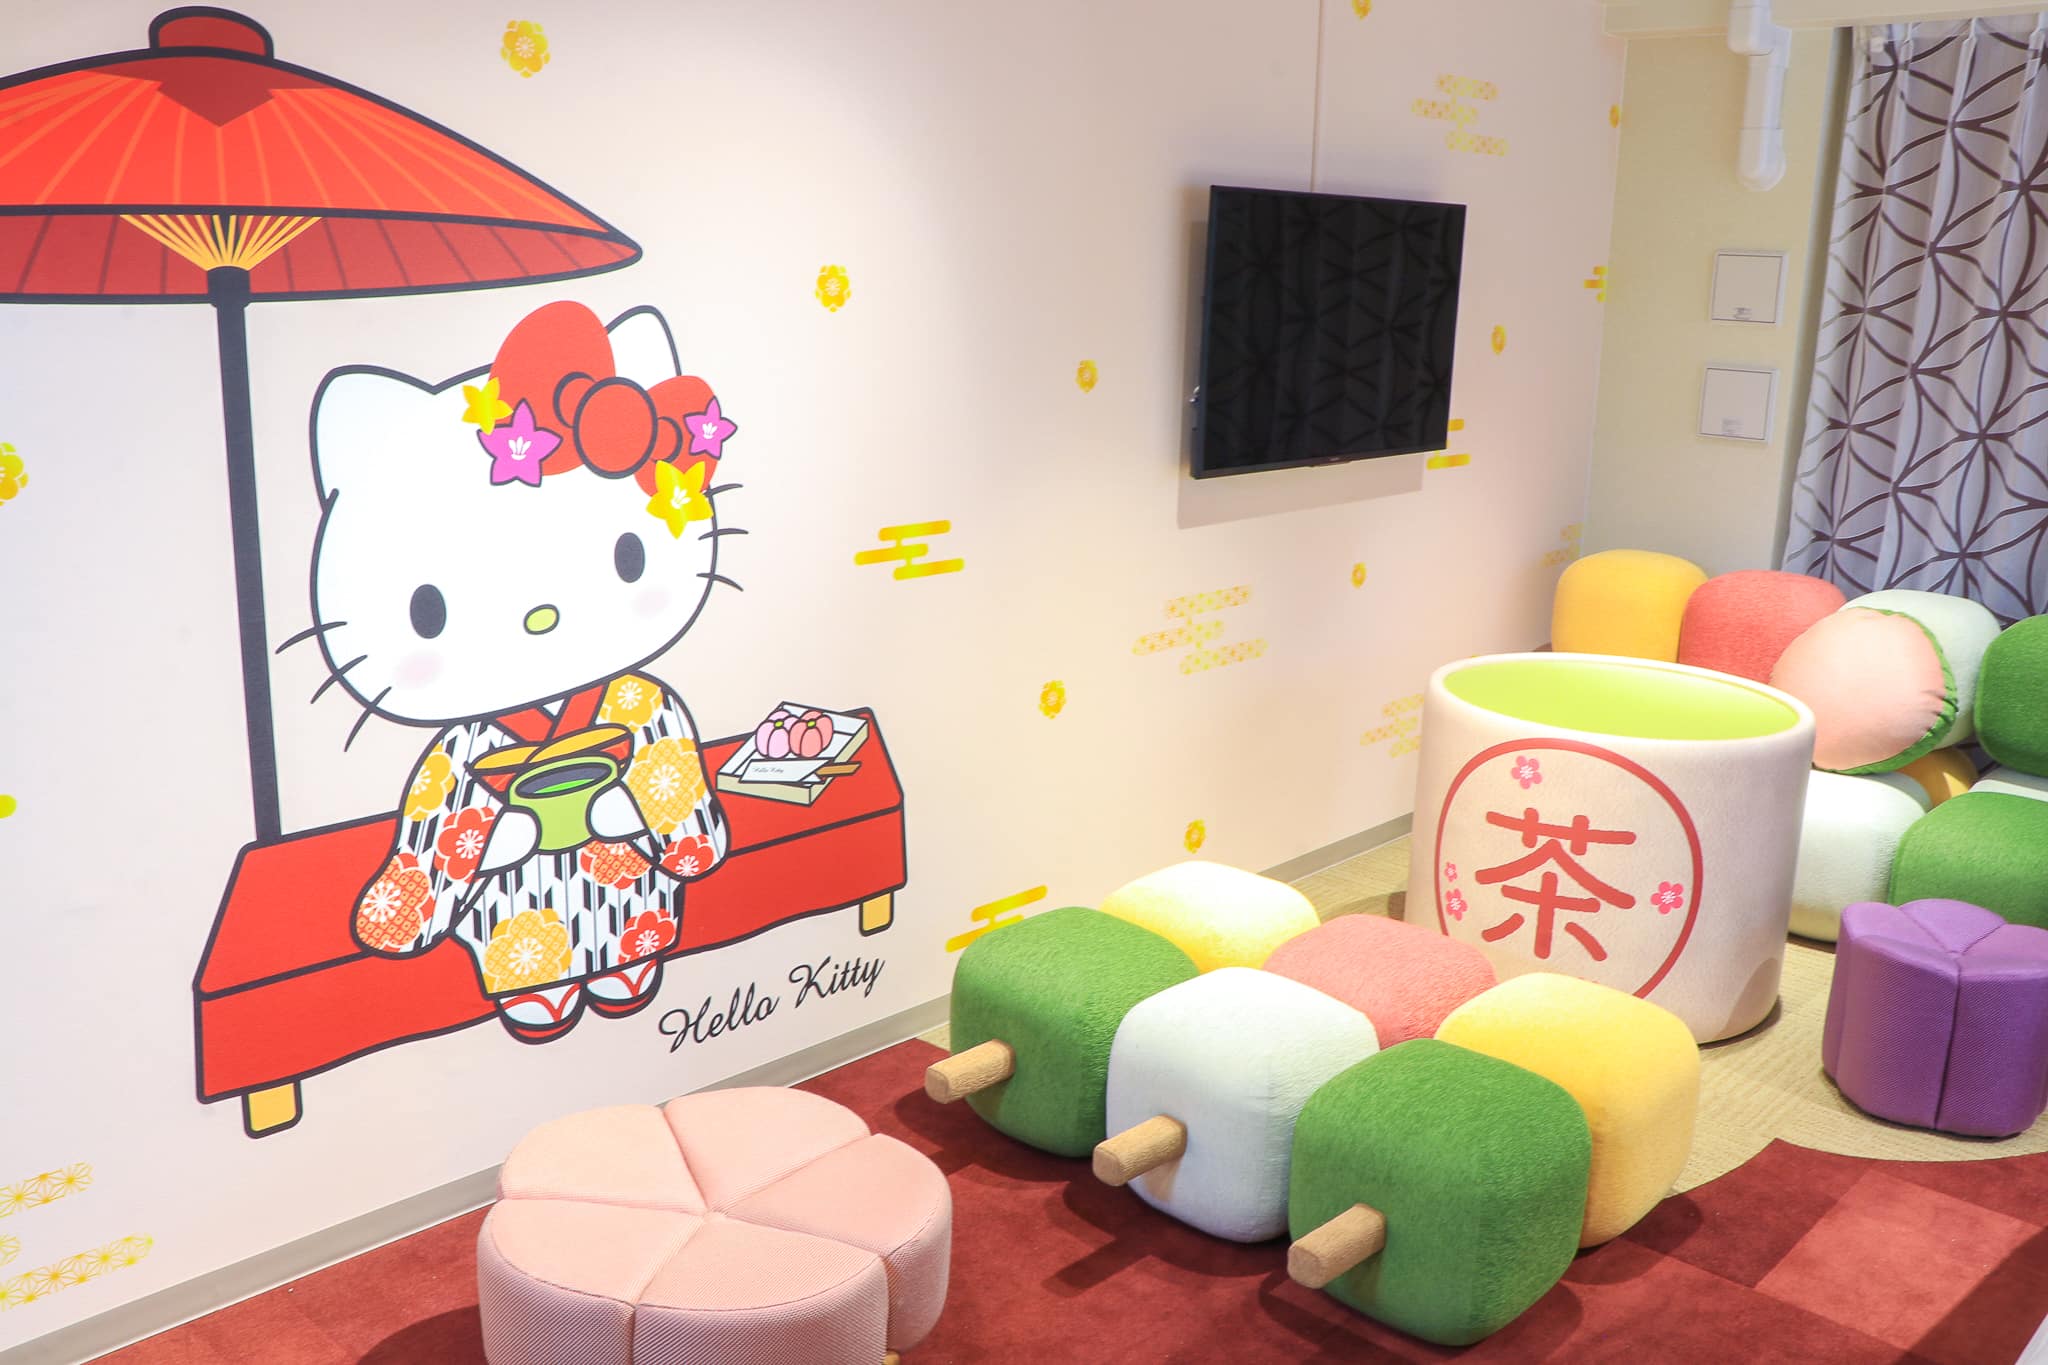 Ryokotomo - 79a6af8c resi stay the hotel kyoto opens hello kitty themed room